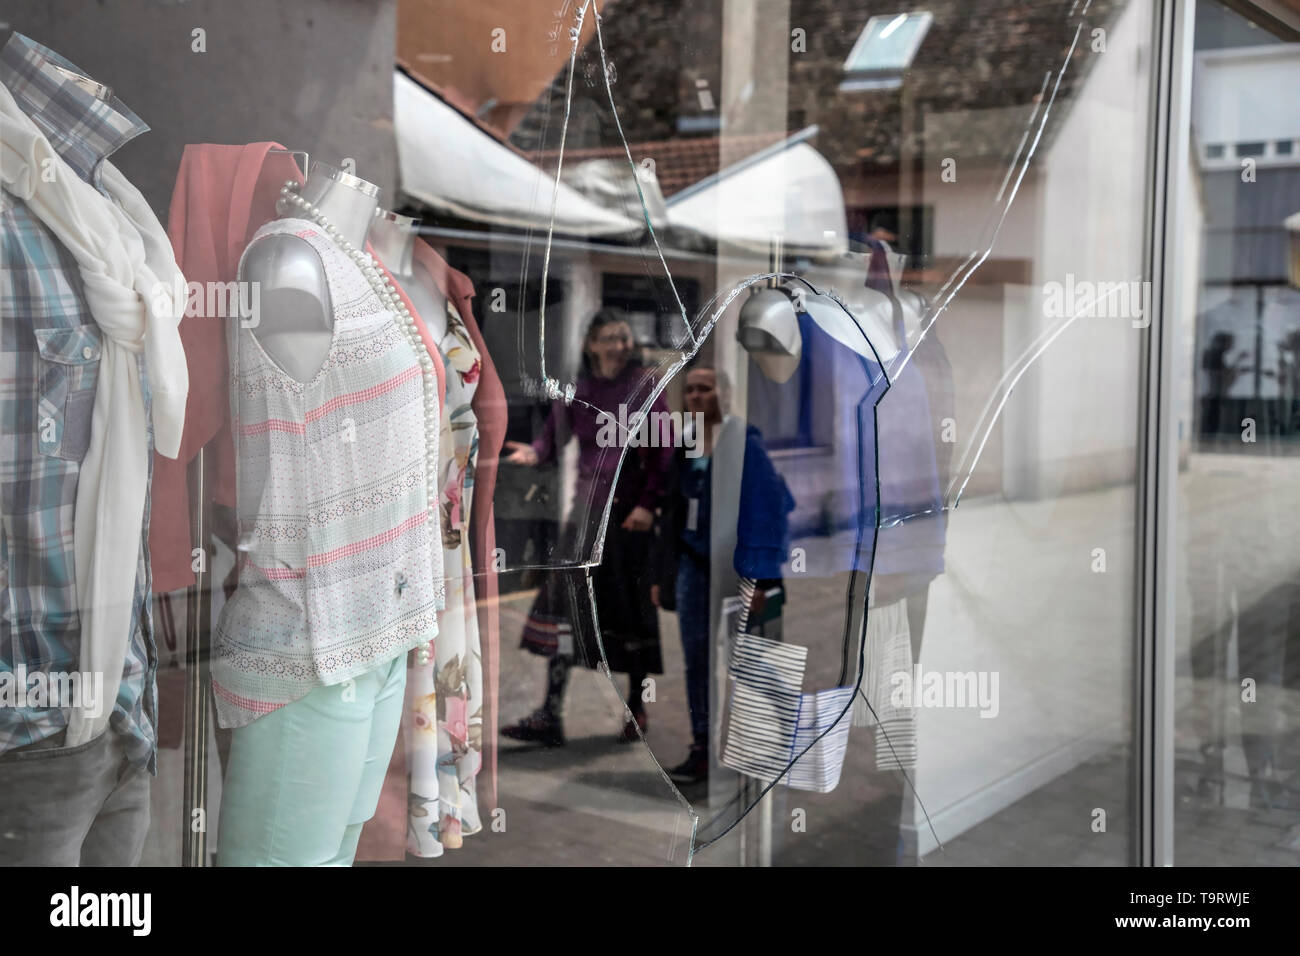 Slavonski Brod, Croatia, May 17th 2019: Downtown scene with showcase of boutiques vandalized and reflection of people walking down the street Stock Photo